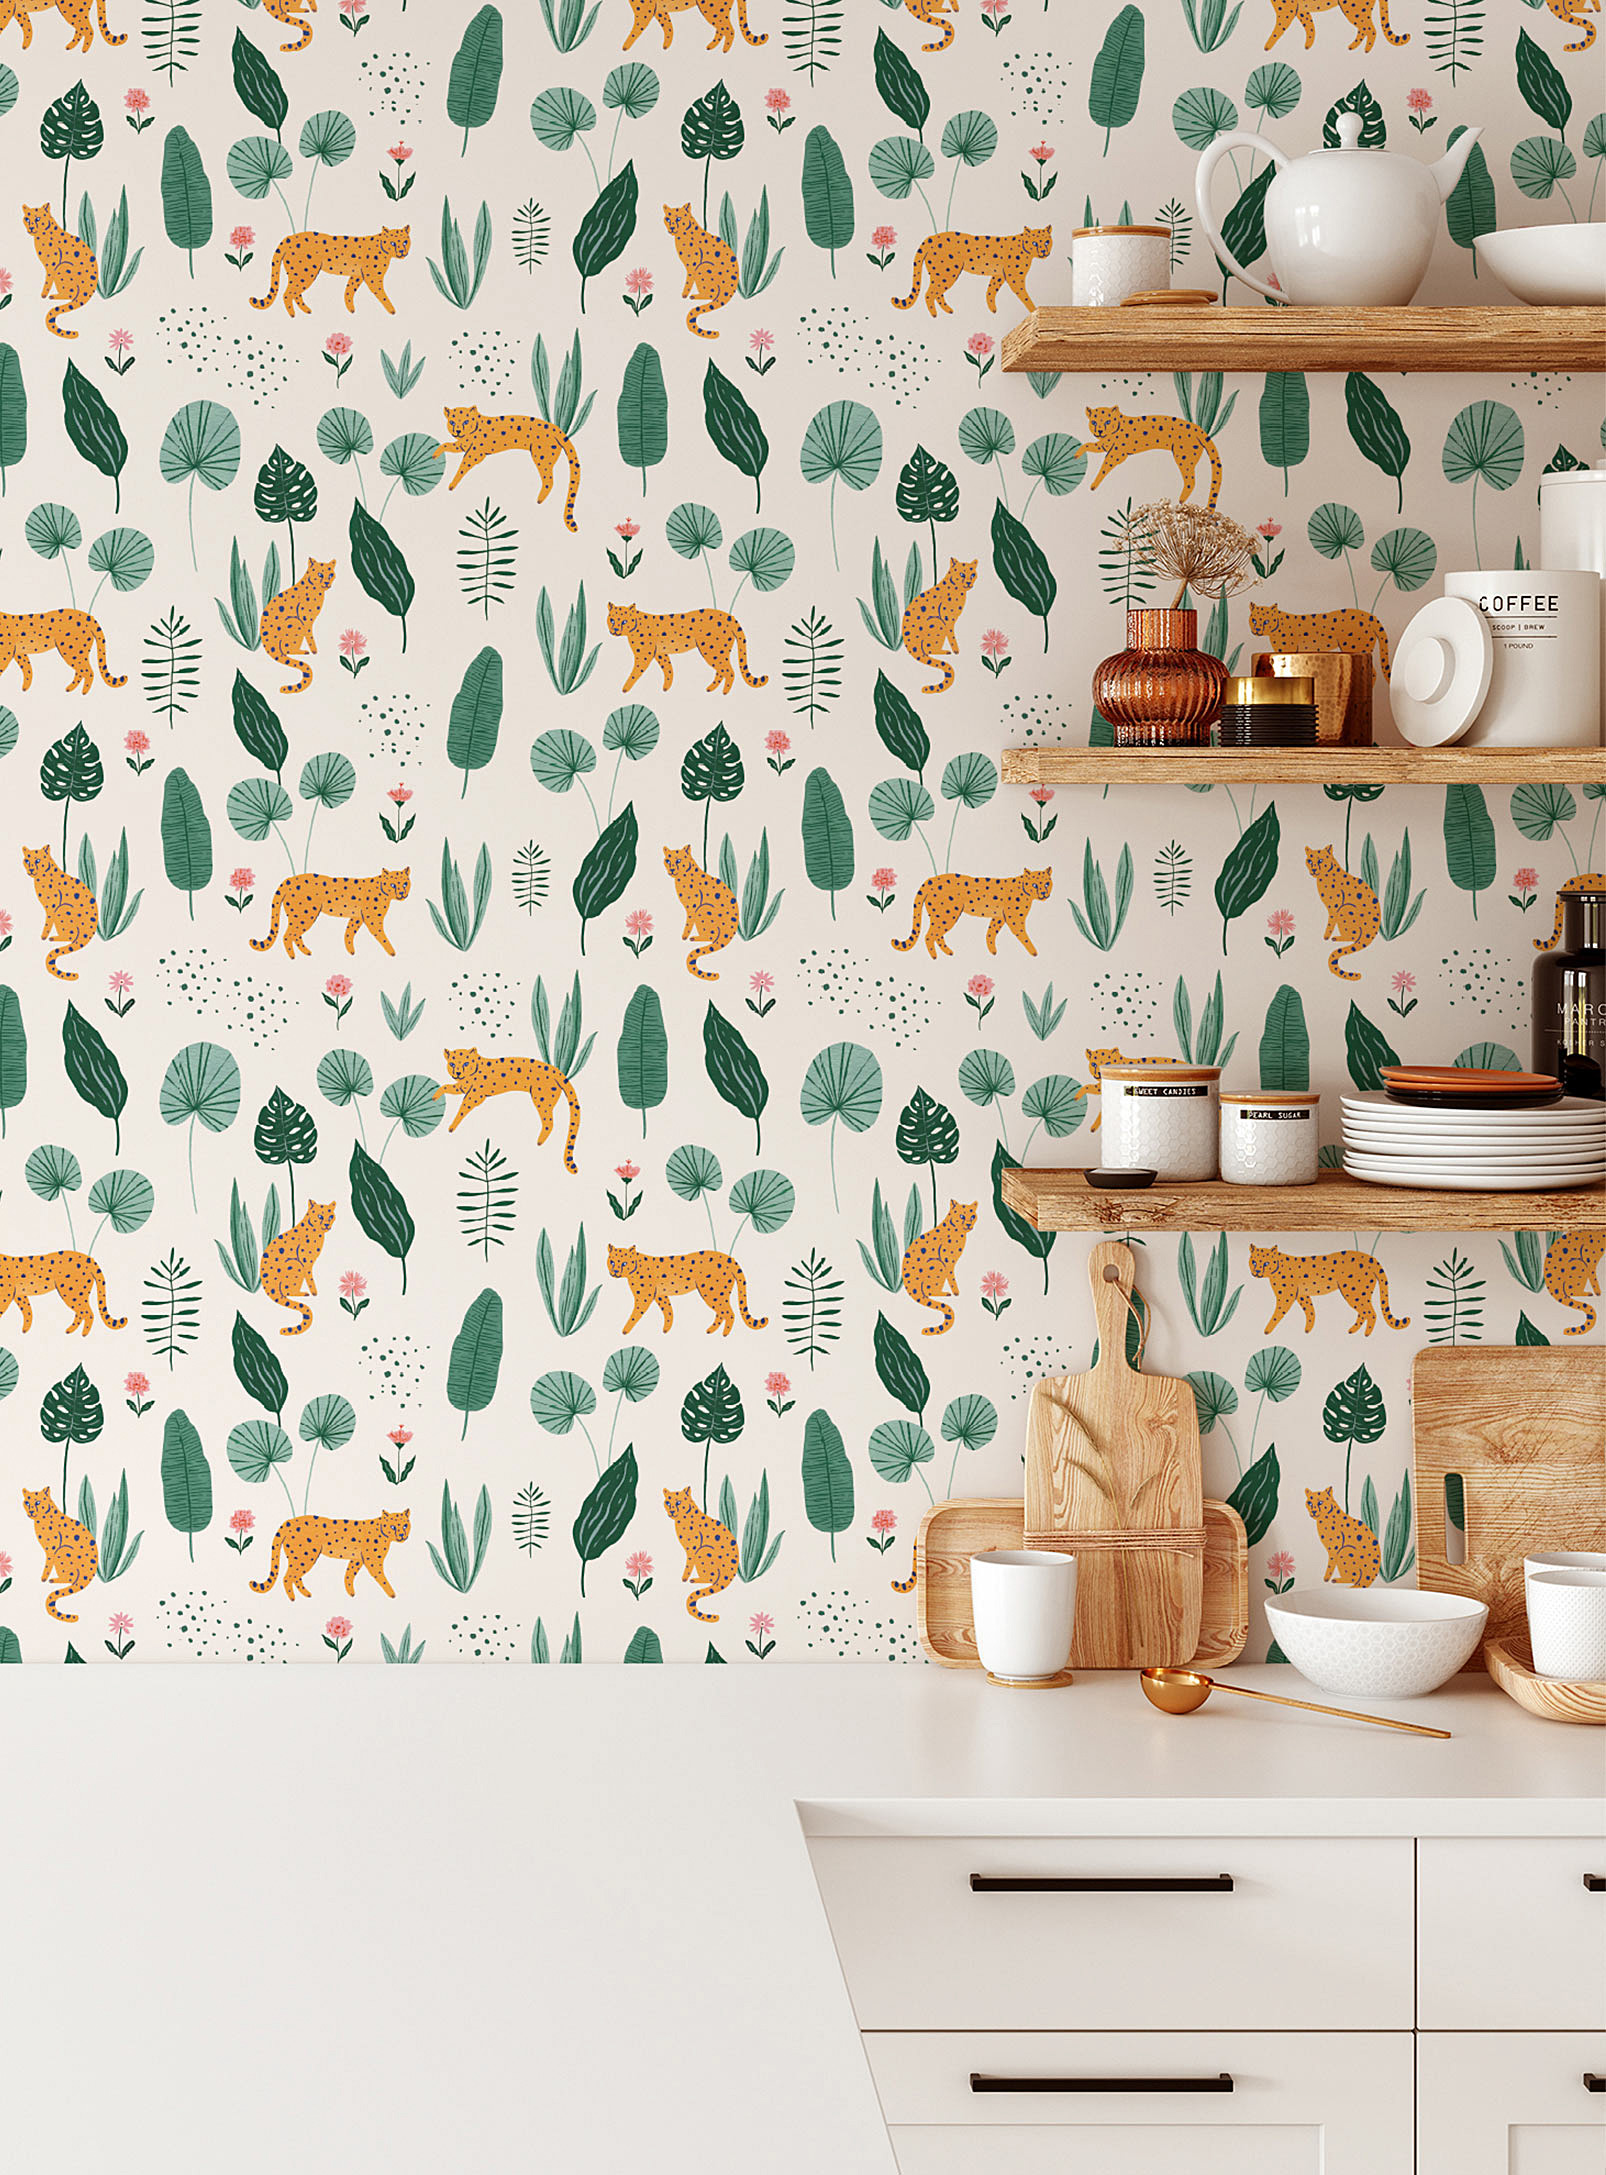 Meraki Fauvisme Self-adhesive Wallpaper Strip In Collaboration With Artist Marie-lise Leclerc In Patterned Green